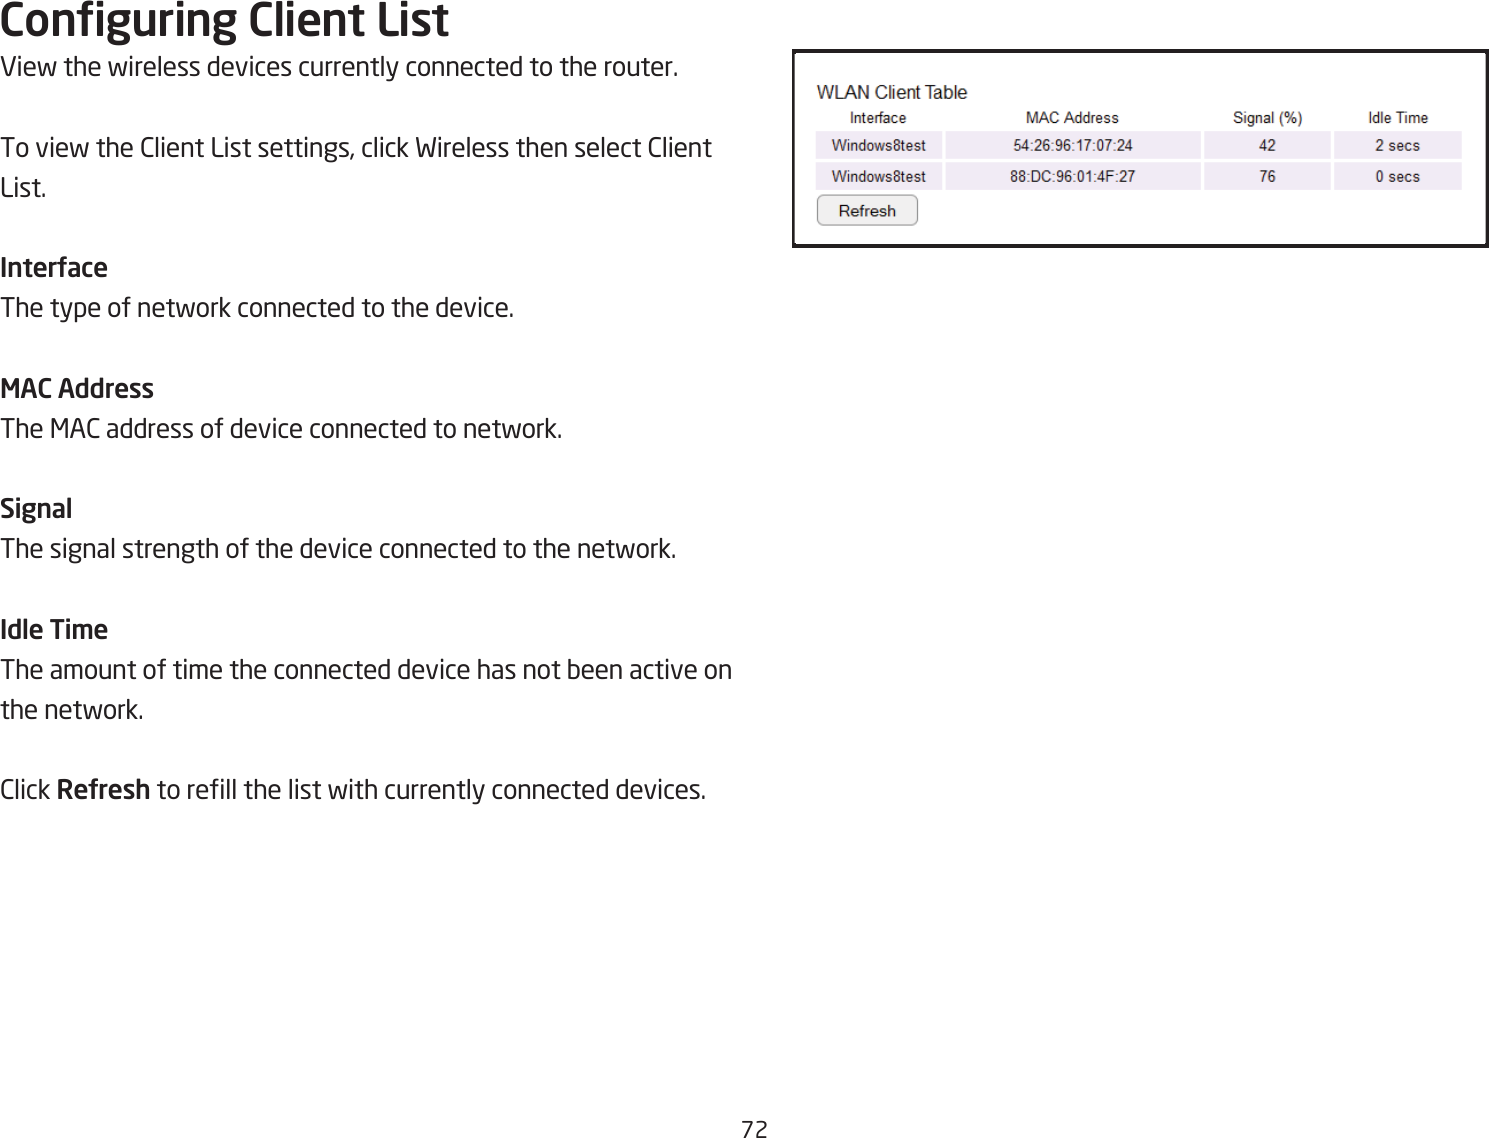 &amp;2Conguring Client ListVief the fireless devices currently connected to the router.To vief the 2lient List settings, click Fireless then select 2lient List.InterUaceThe type of netfork connected to the device.MAC AddressThe &lt;A2 address of device connected to netfork.SignalThe signal strength of the device connected to the netfork.Idle Ti\eThe amount of time the connected device has not Qeen active on the netfork.2lick ReUresh to rell the list fith currently connected devices.